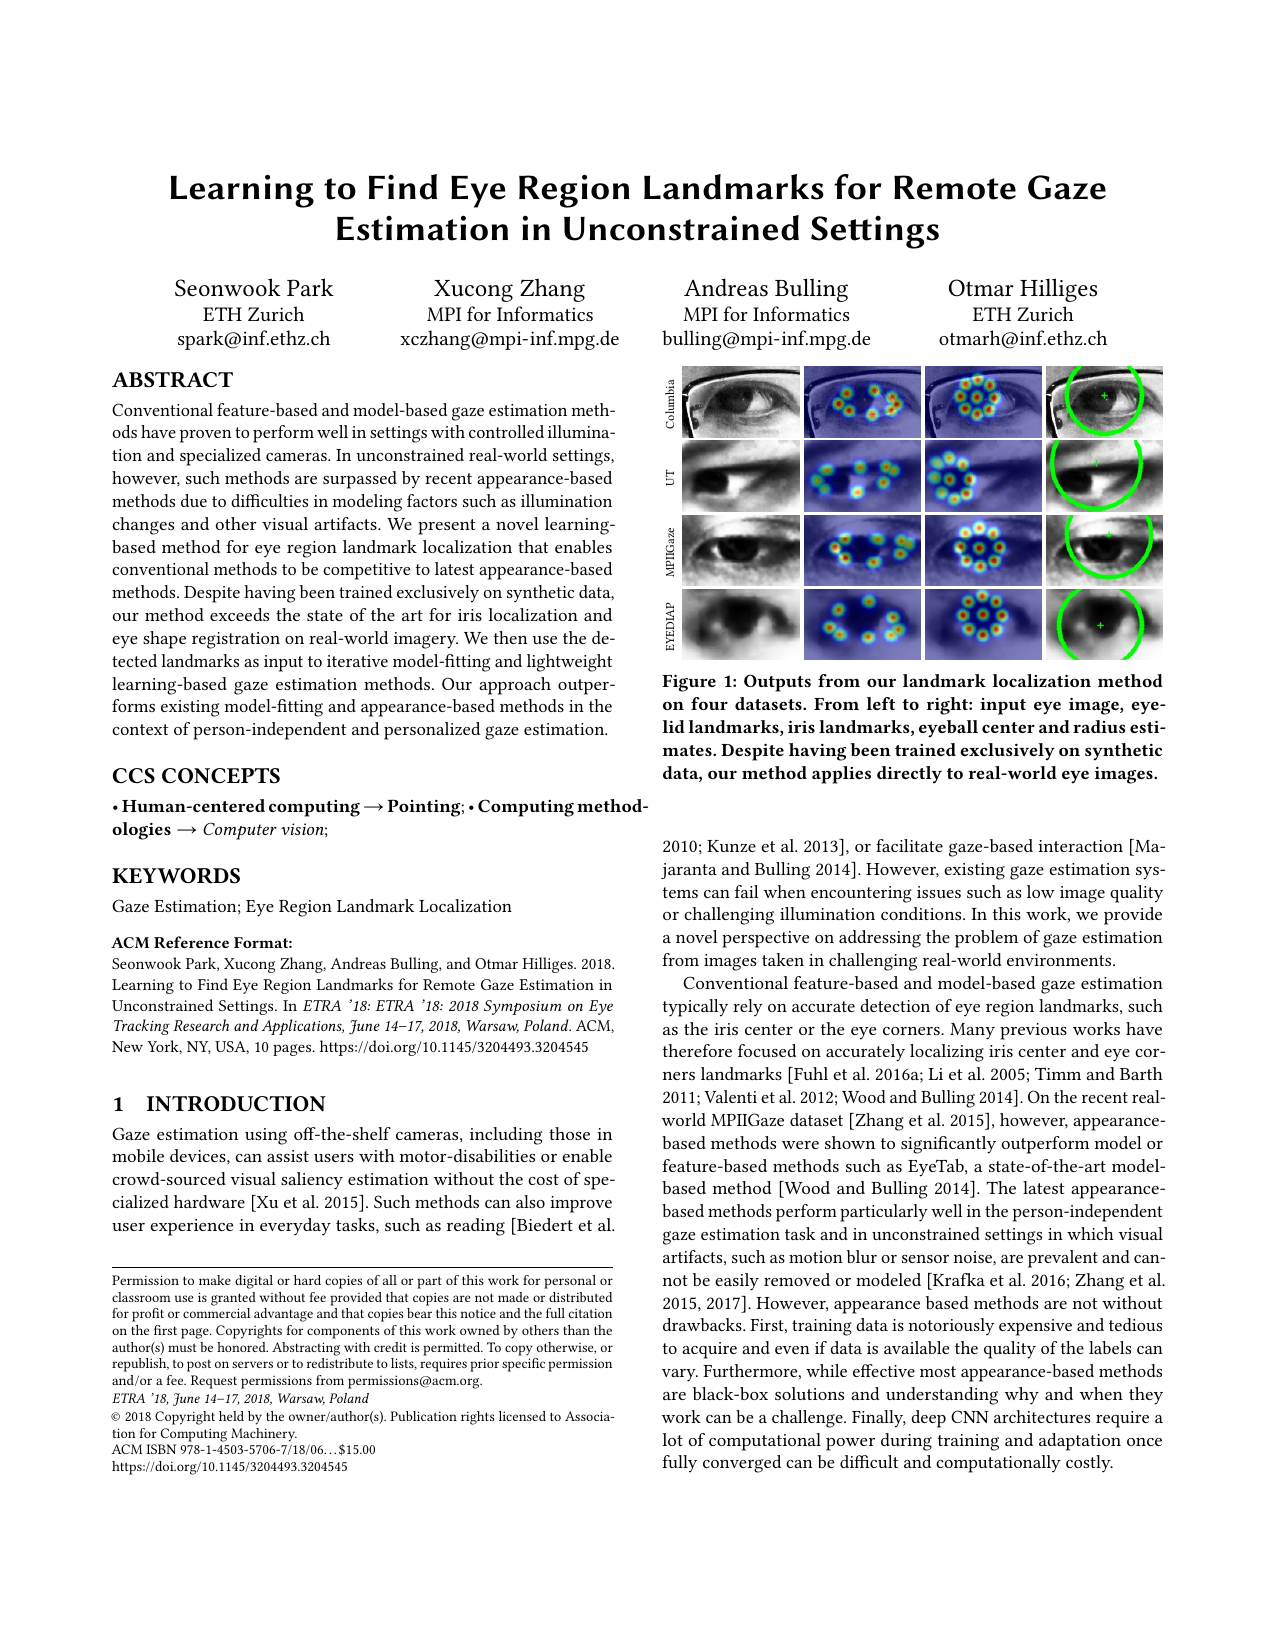 Learning to Find Eye Region Landmarks for Remote Gaze Estimation in Unconstrained Settings